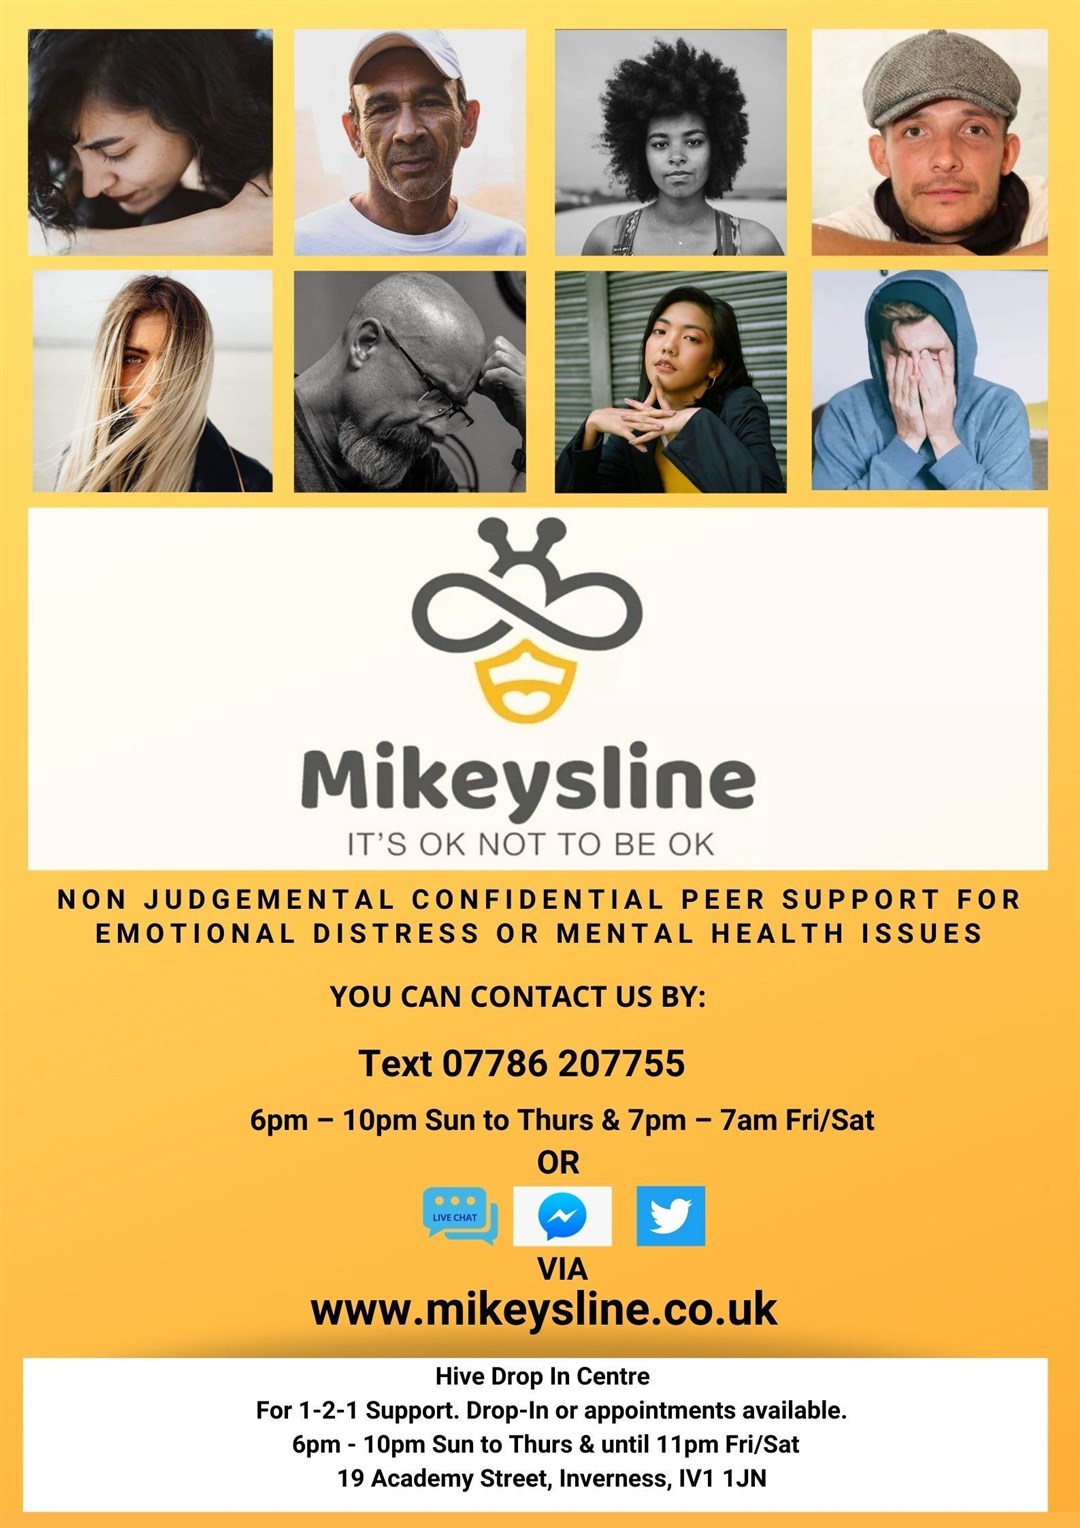 Mikeysline has announced new services for World Mental Health day.